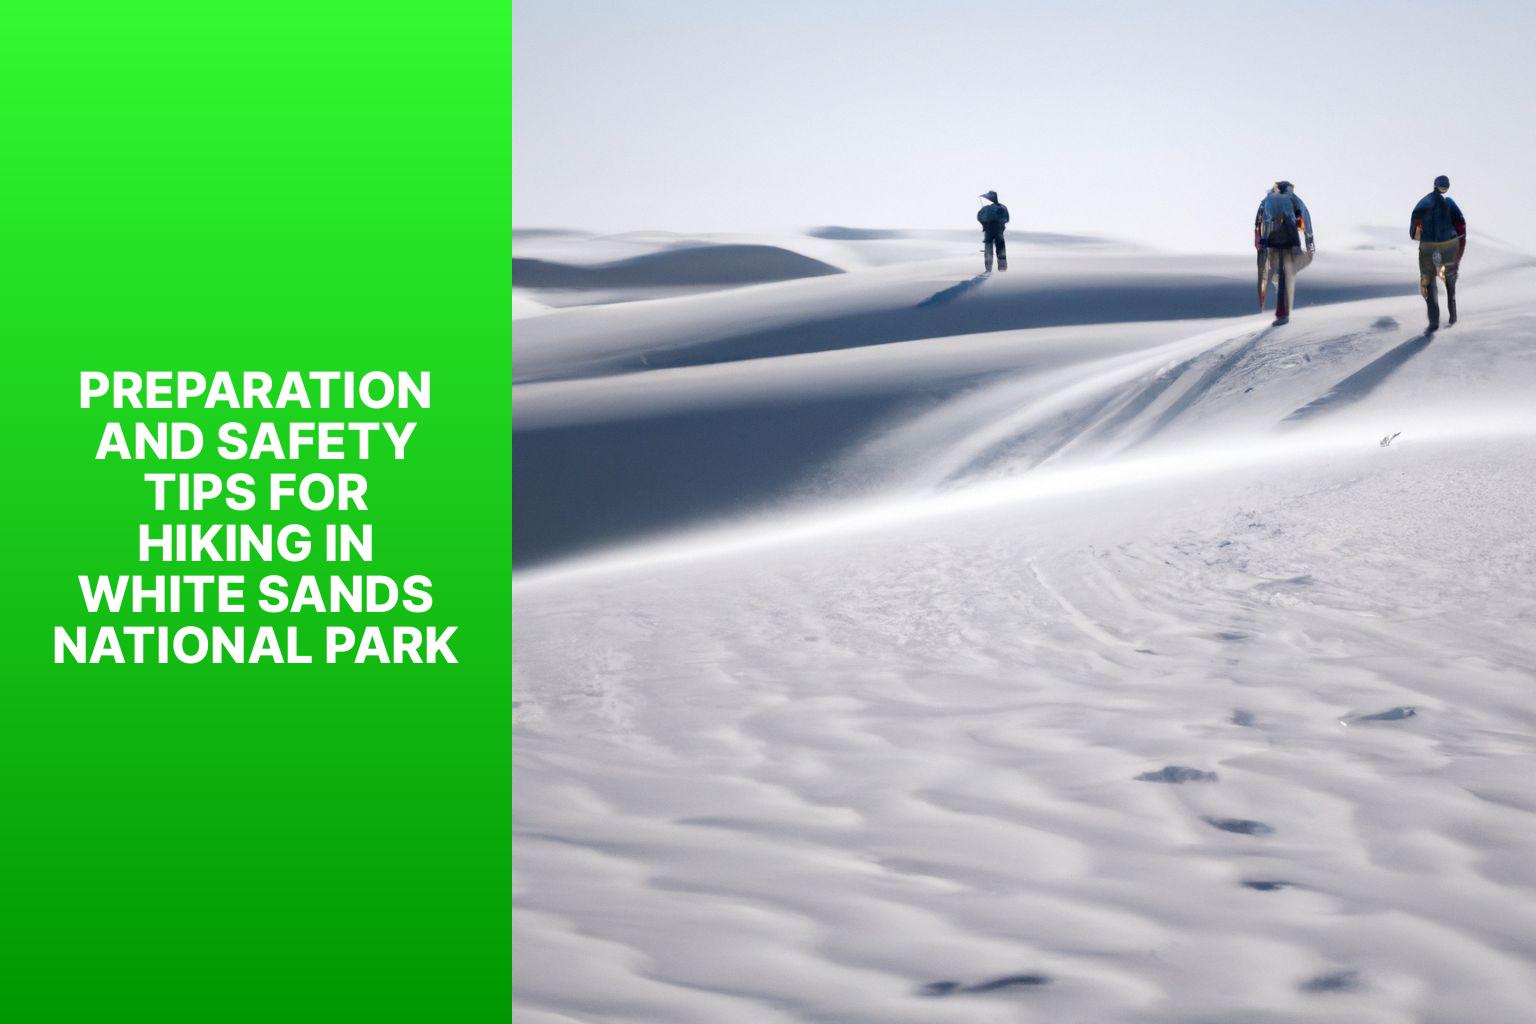 Preparation and Safety Tips for Hiking in White Sands National Park - Hikes in White Sands National Park 